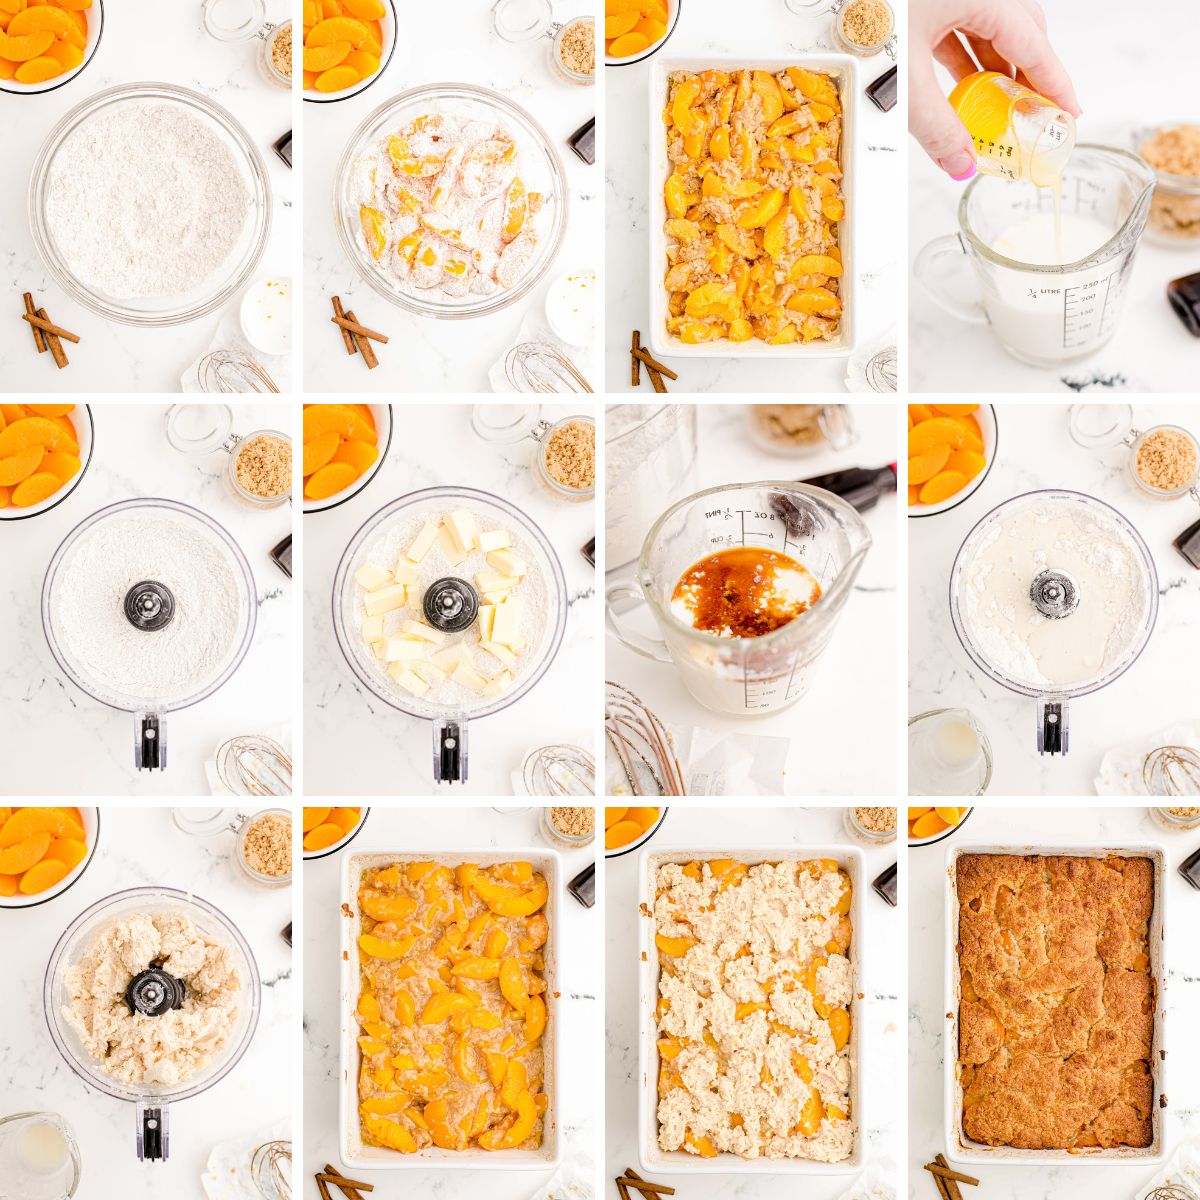 Step by step photo collage showing how to make peach cobbler with canned peaches.